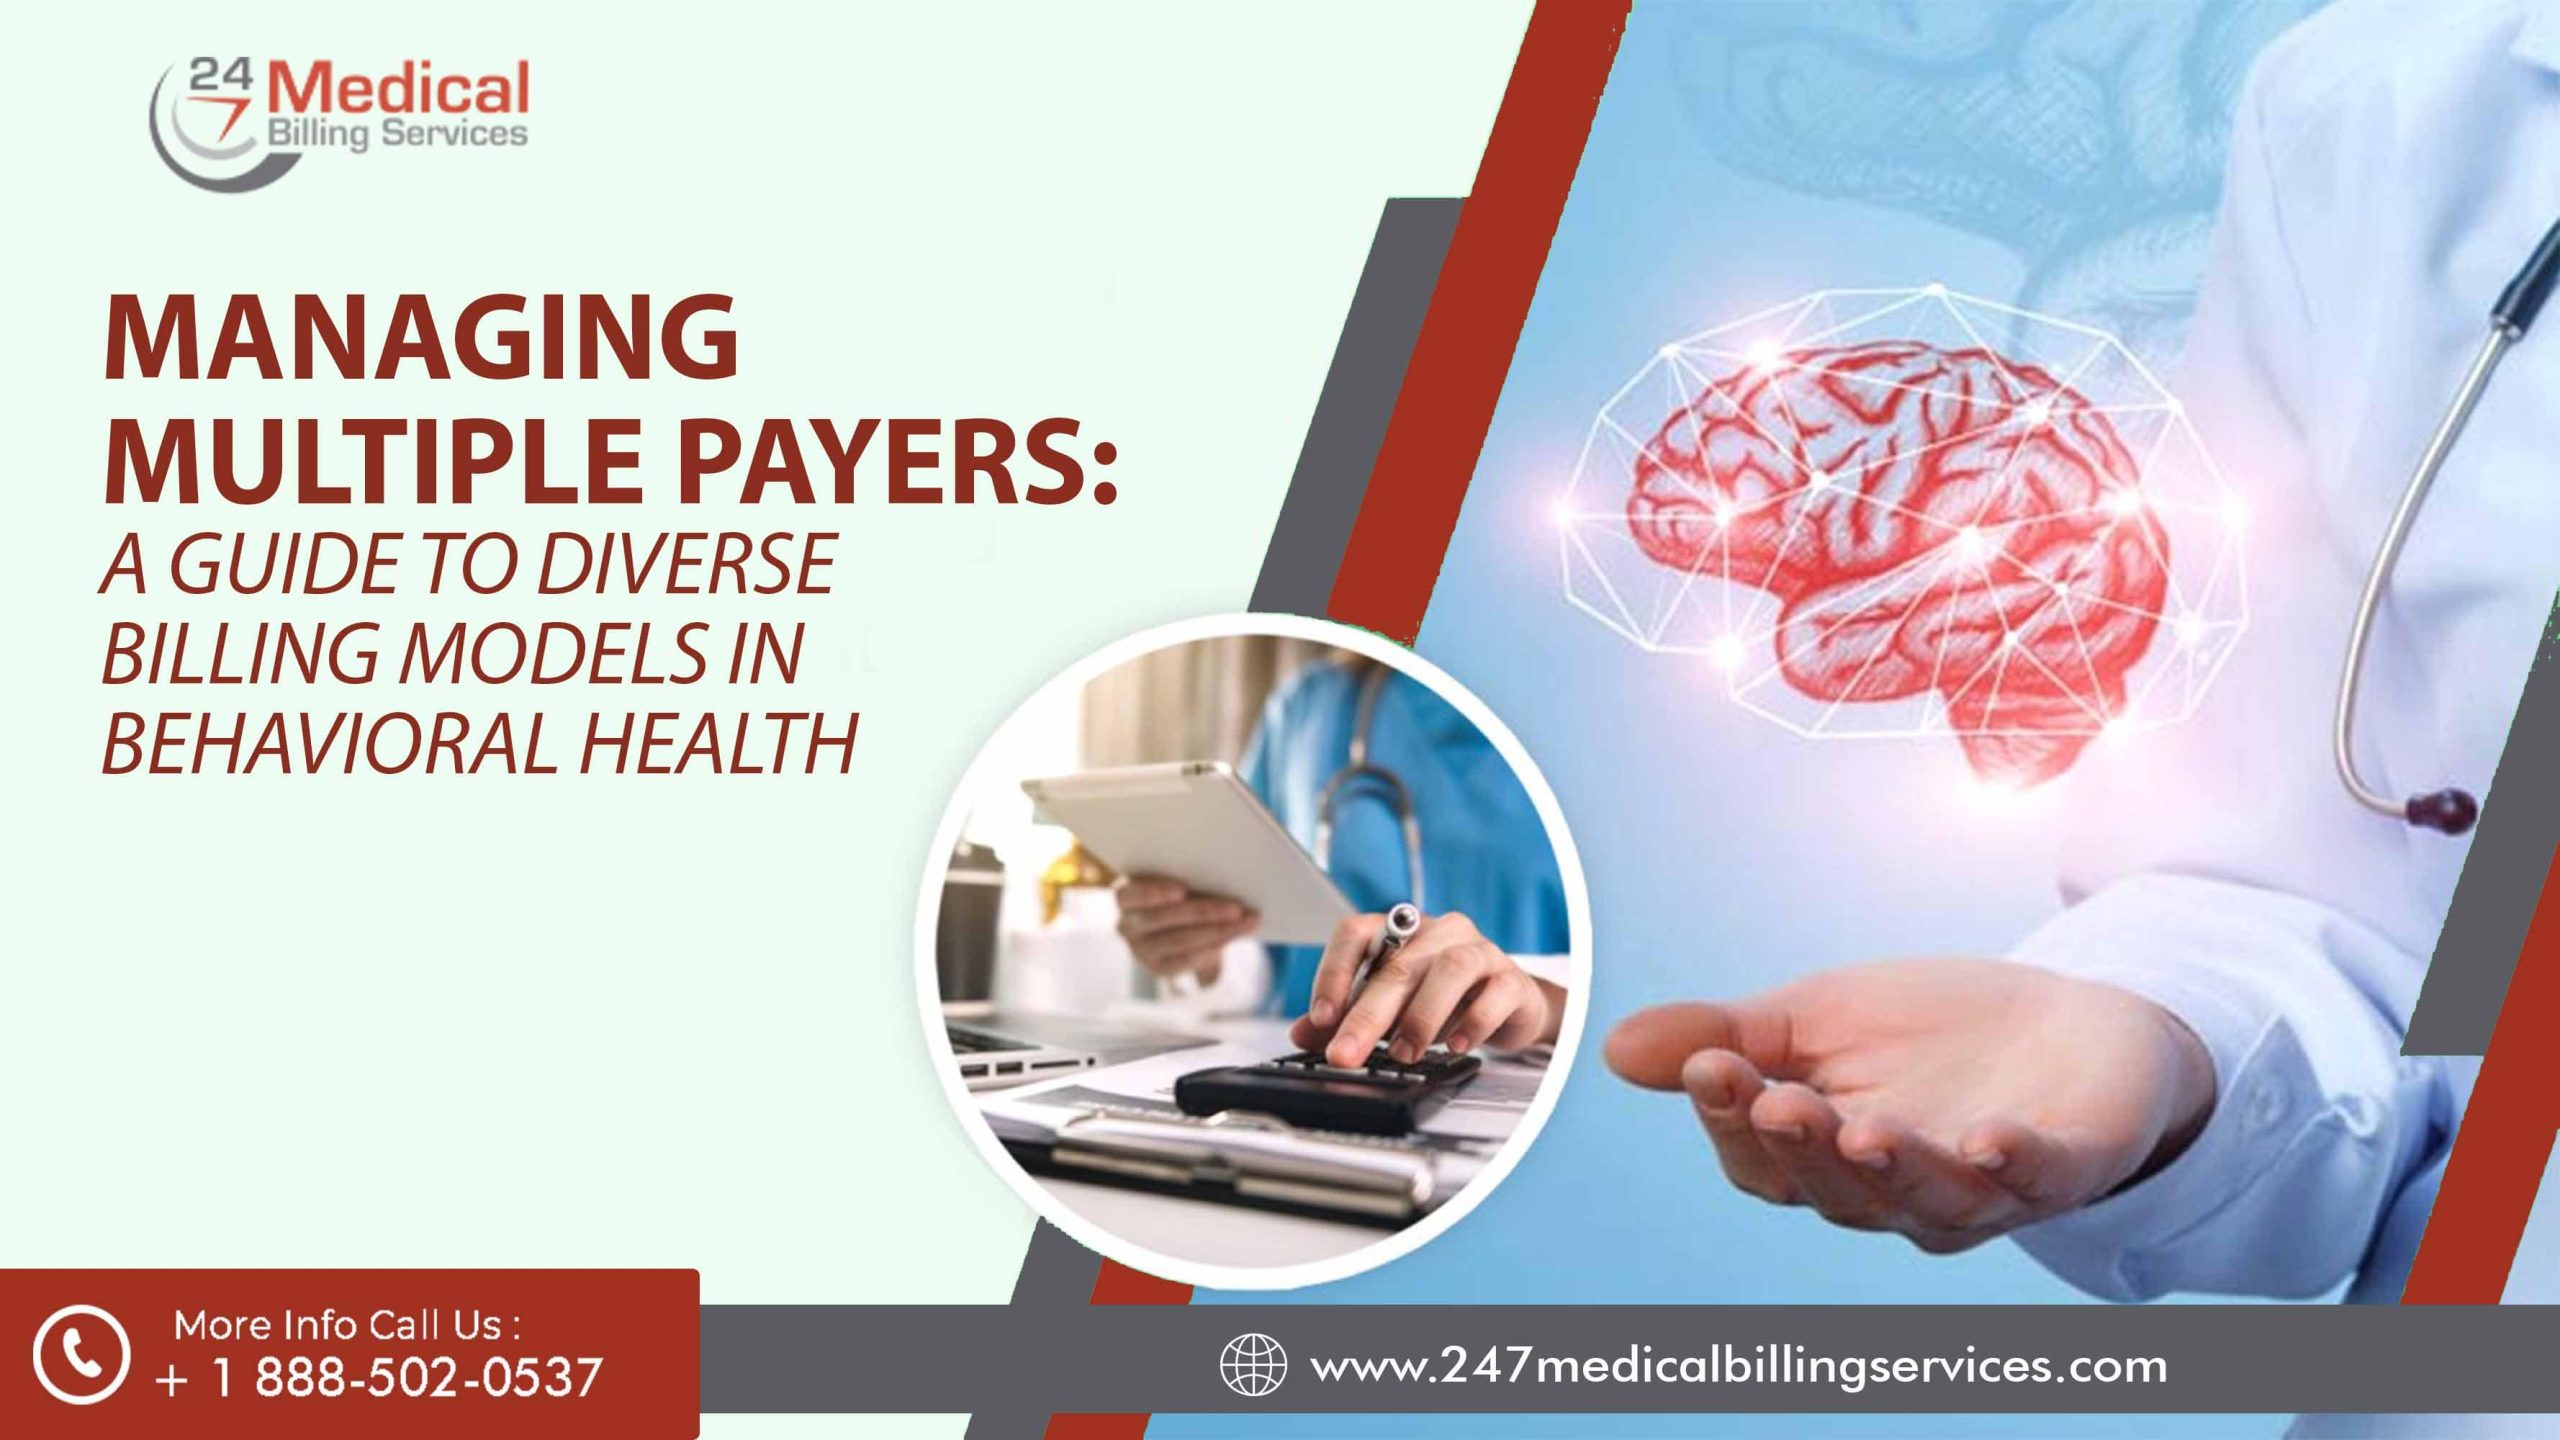  Managing Multiple Payers: A Guide to Diverse Billing Models in Behavioral Health